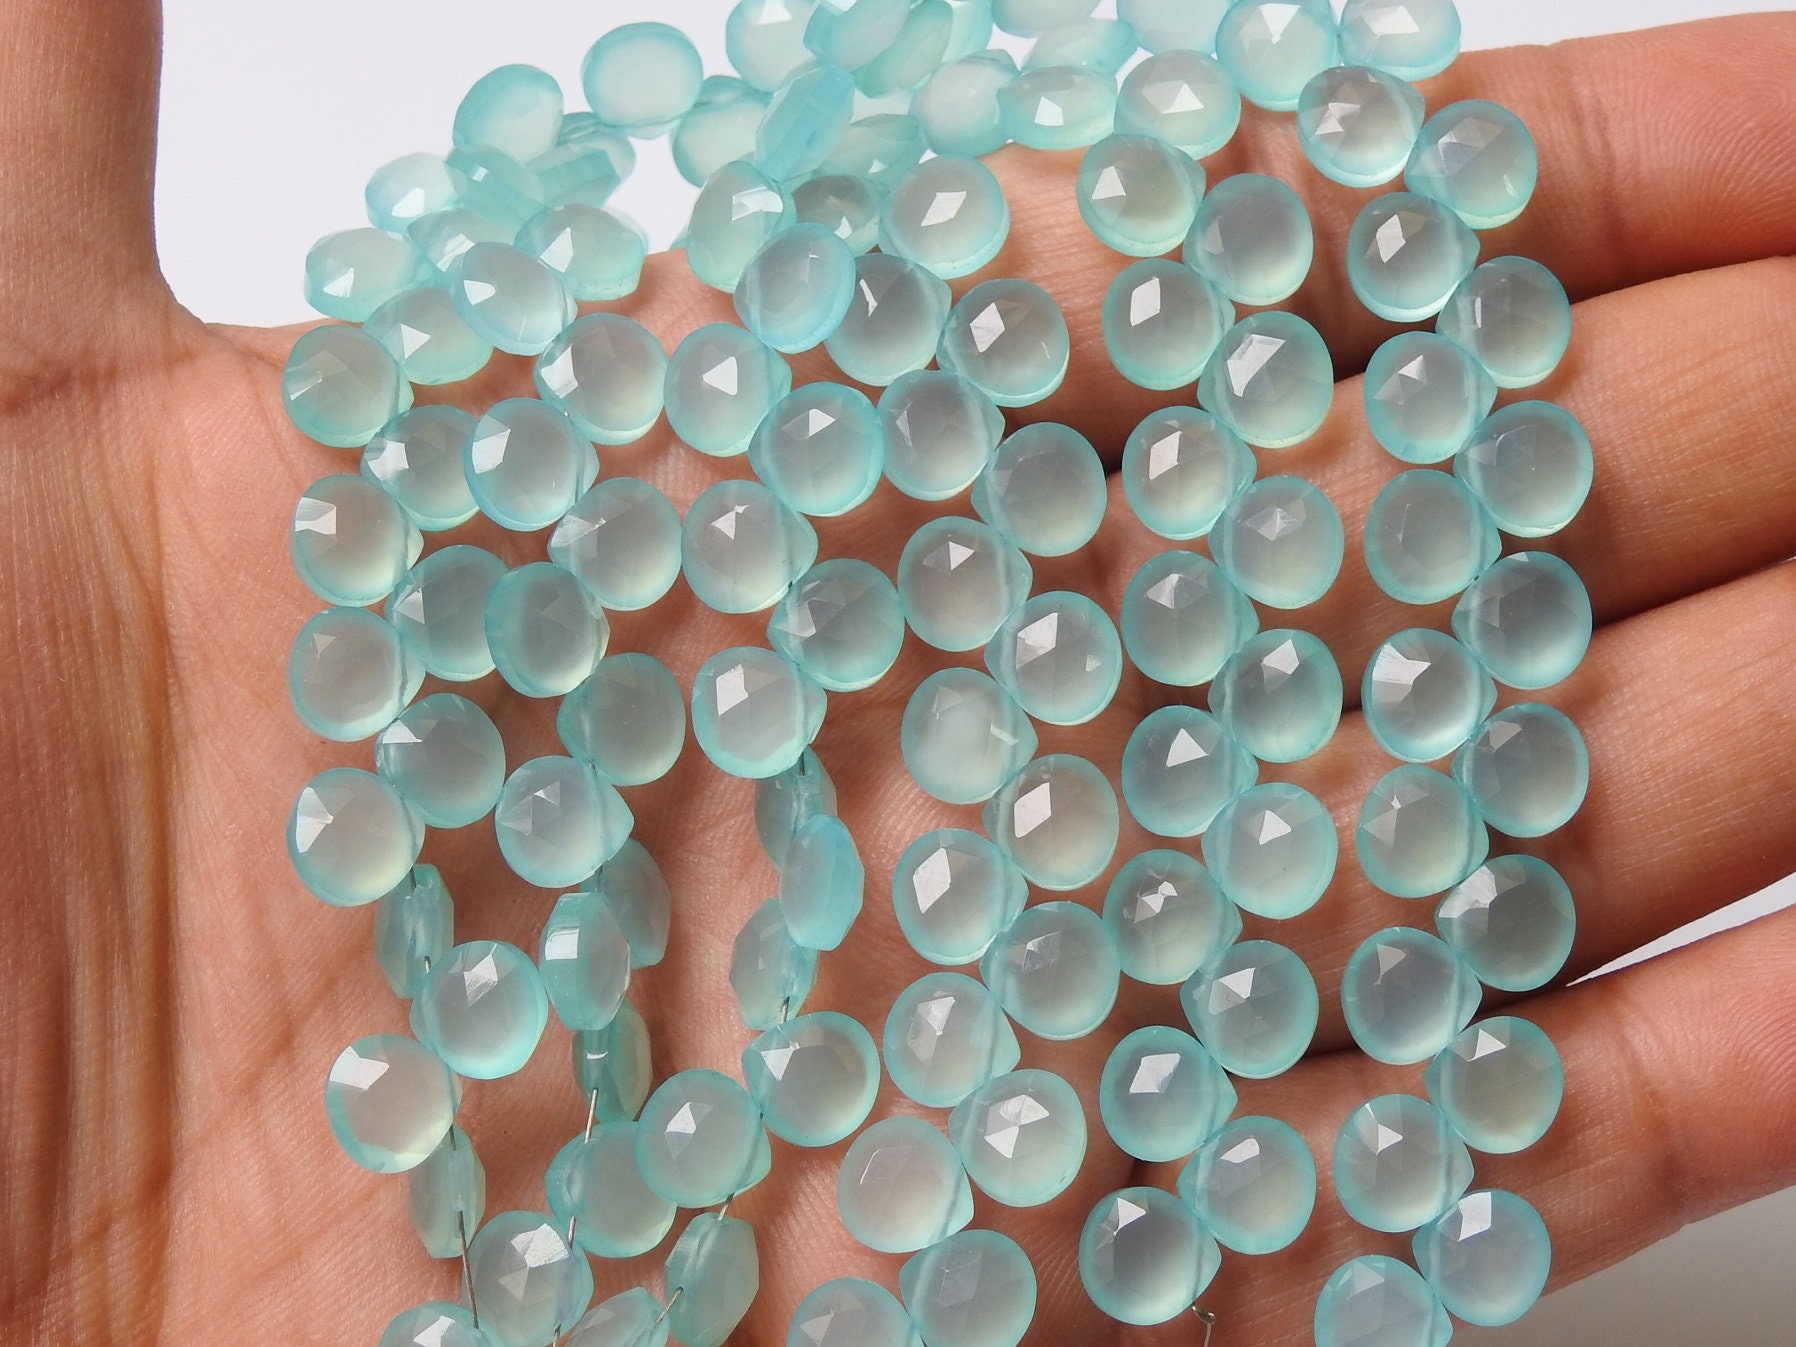 Aqua Blue Chalcedony Faceted Hearts,Teardrop,Drop,Loose Stone,Handmade,Earrings Pair,For Making Jewelry 4Inch Strand 8X8 MM Approx (pme)CY2 | Save 33% - Rajasthan Living 17